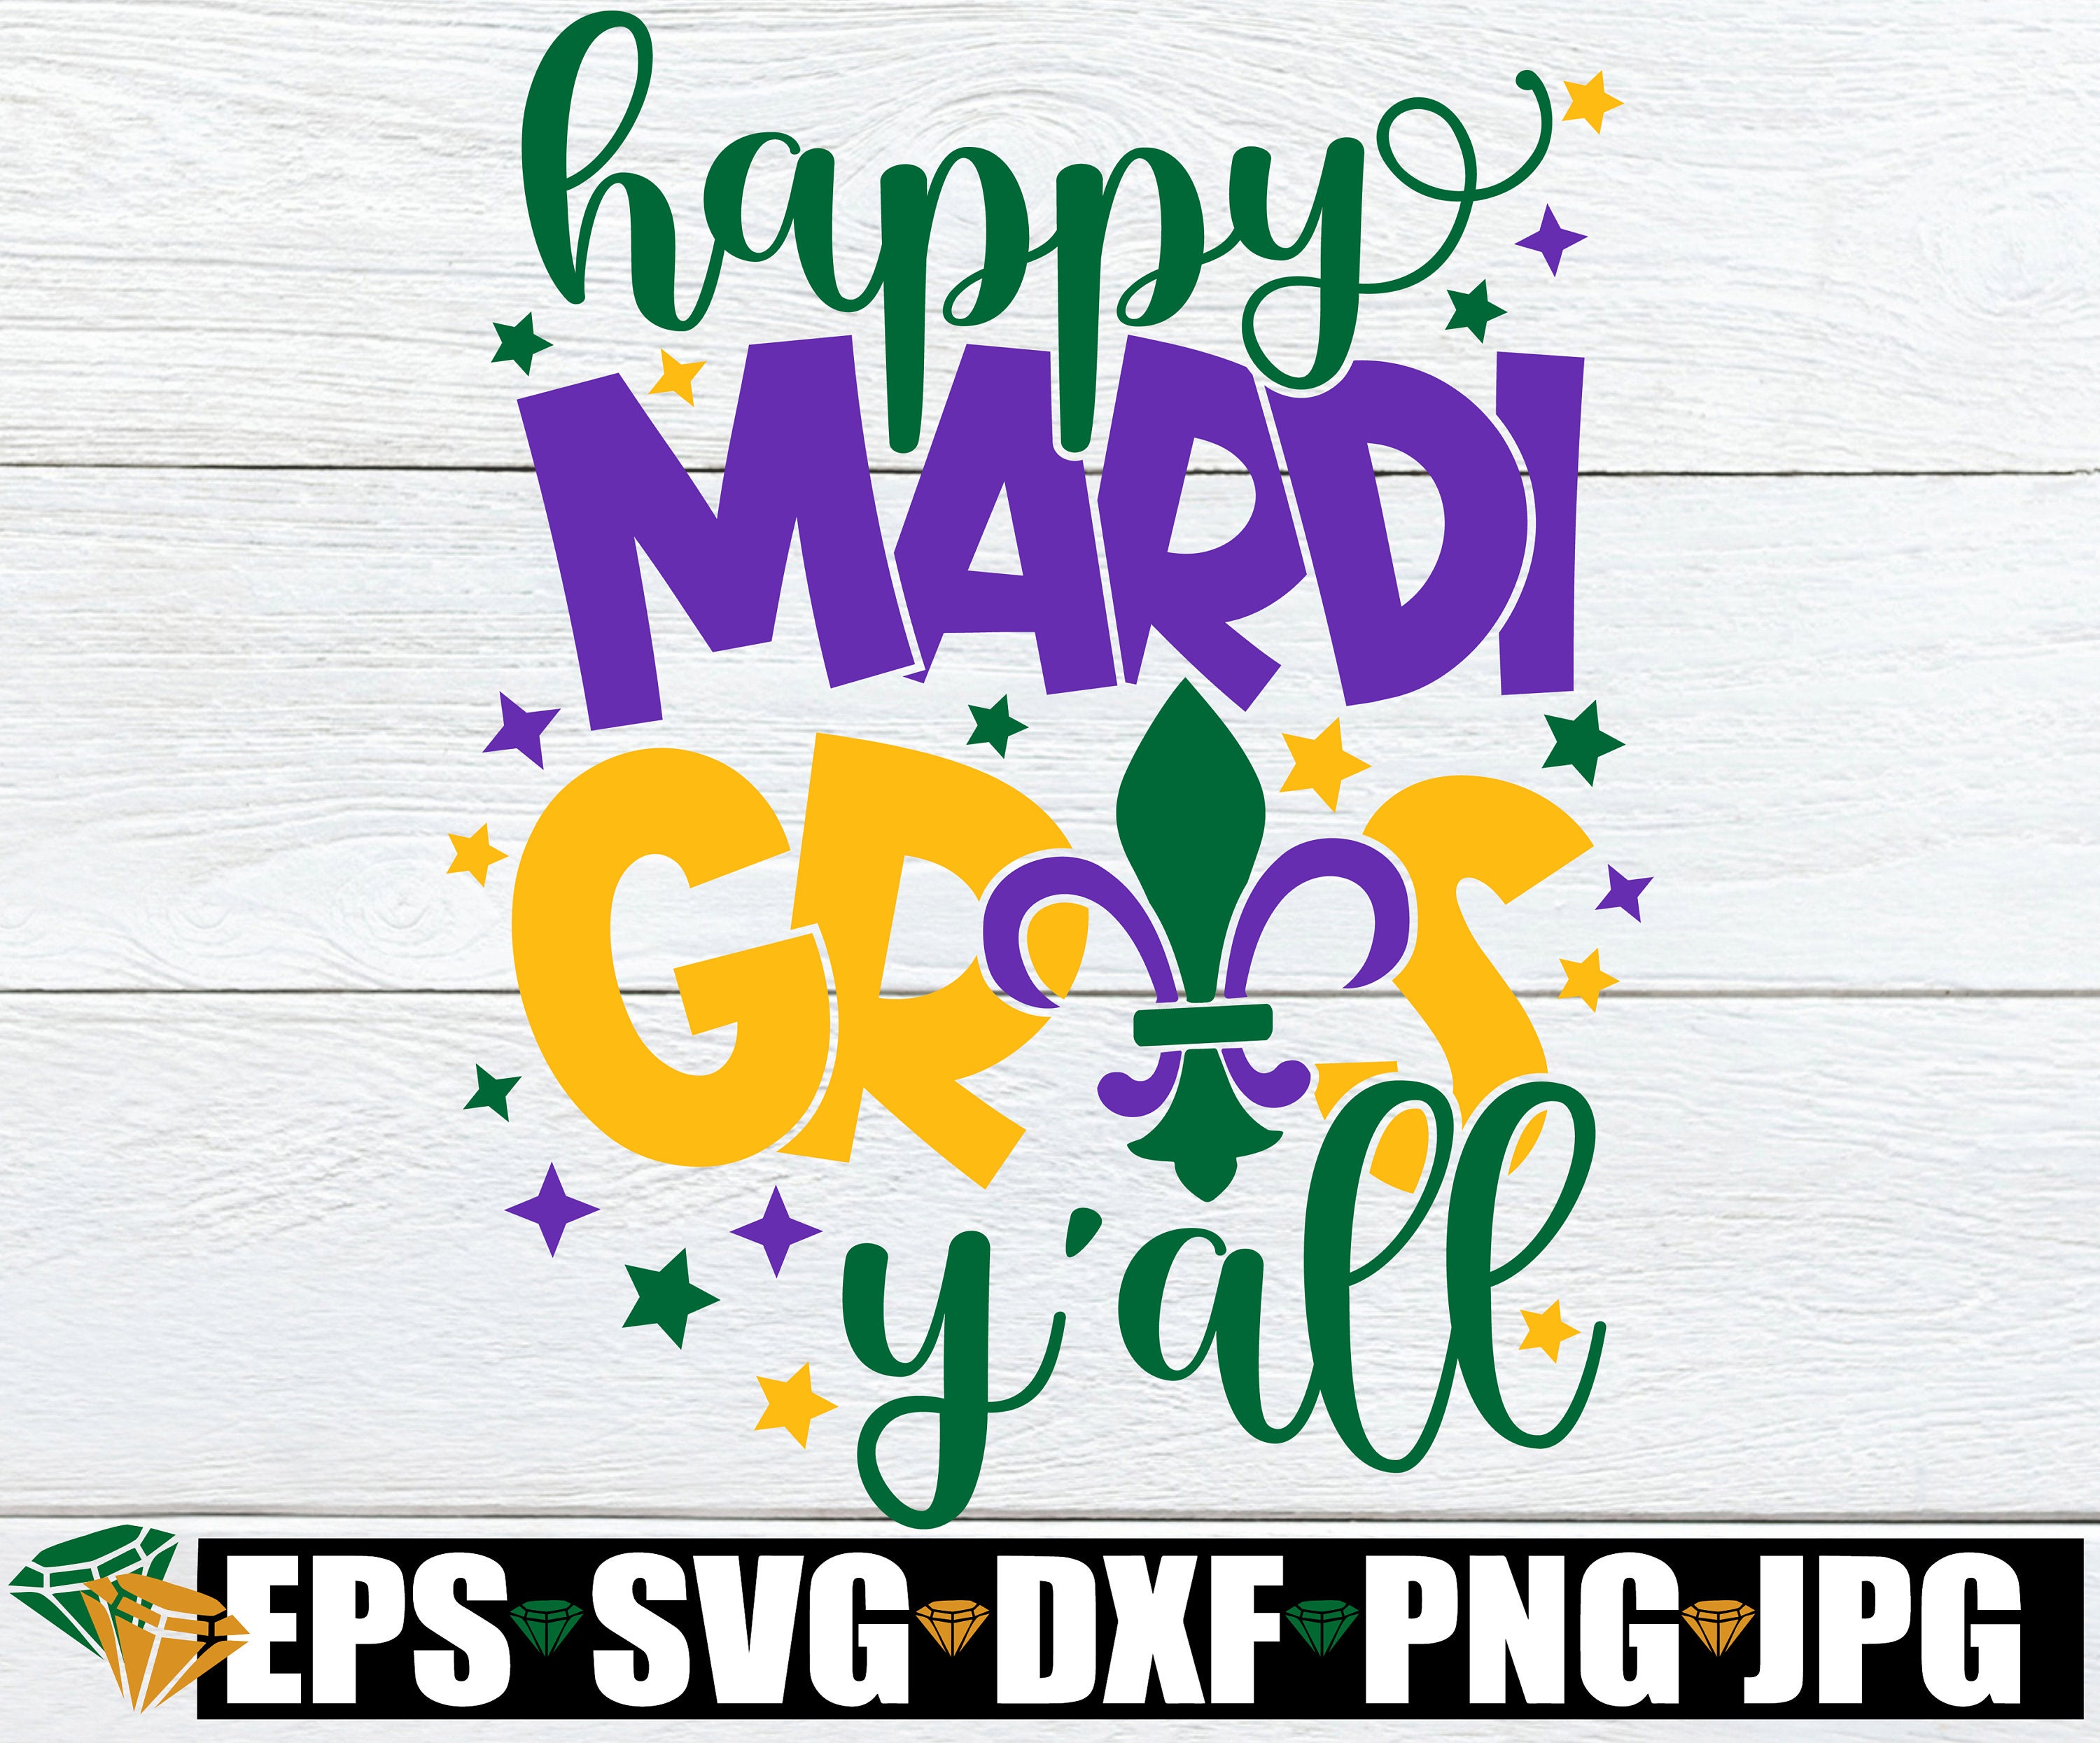 Cool Mardi Gras Printing Patches Iron On Beads & Bling DTF Festival Heat  Transfers Stickers Ready To Press For Shirts